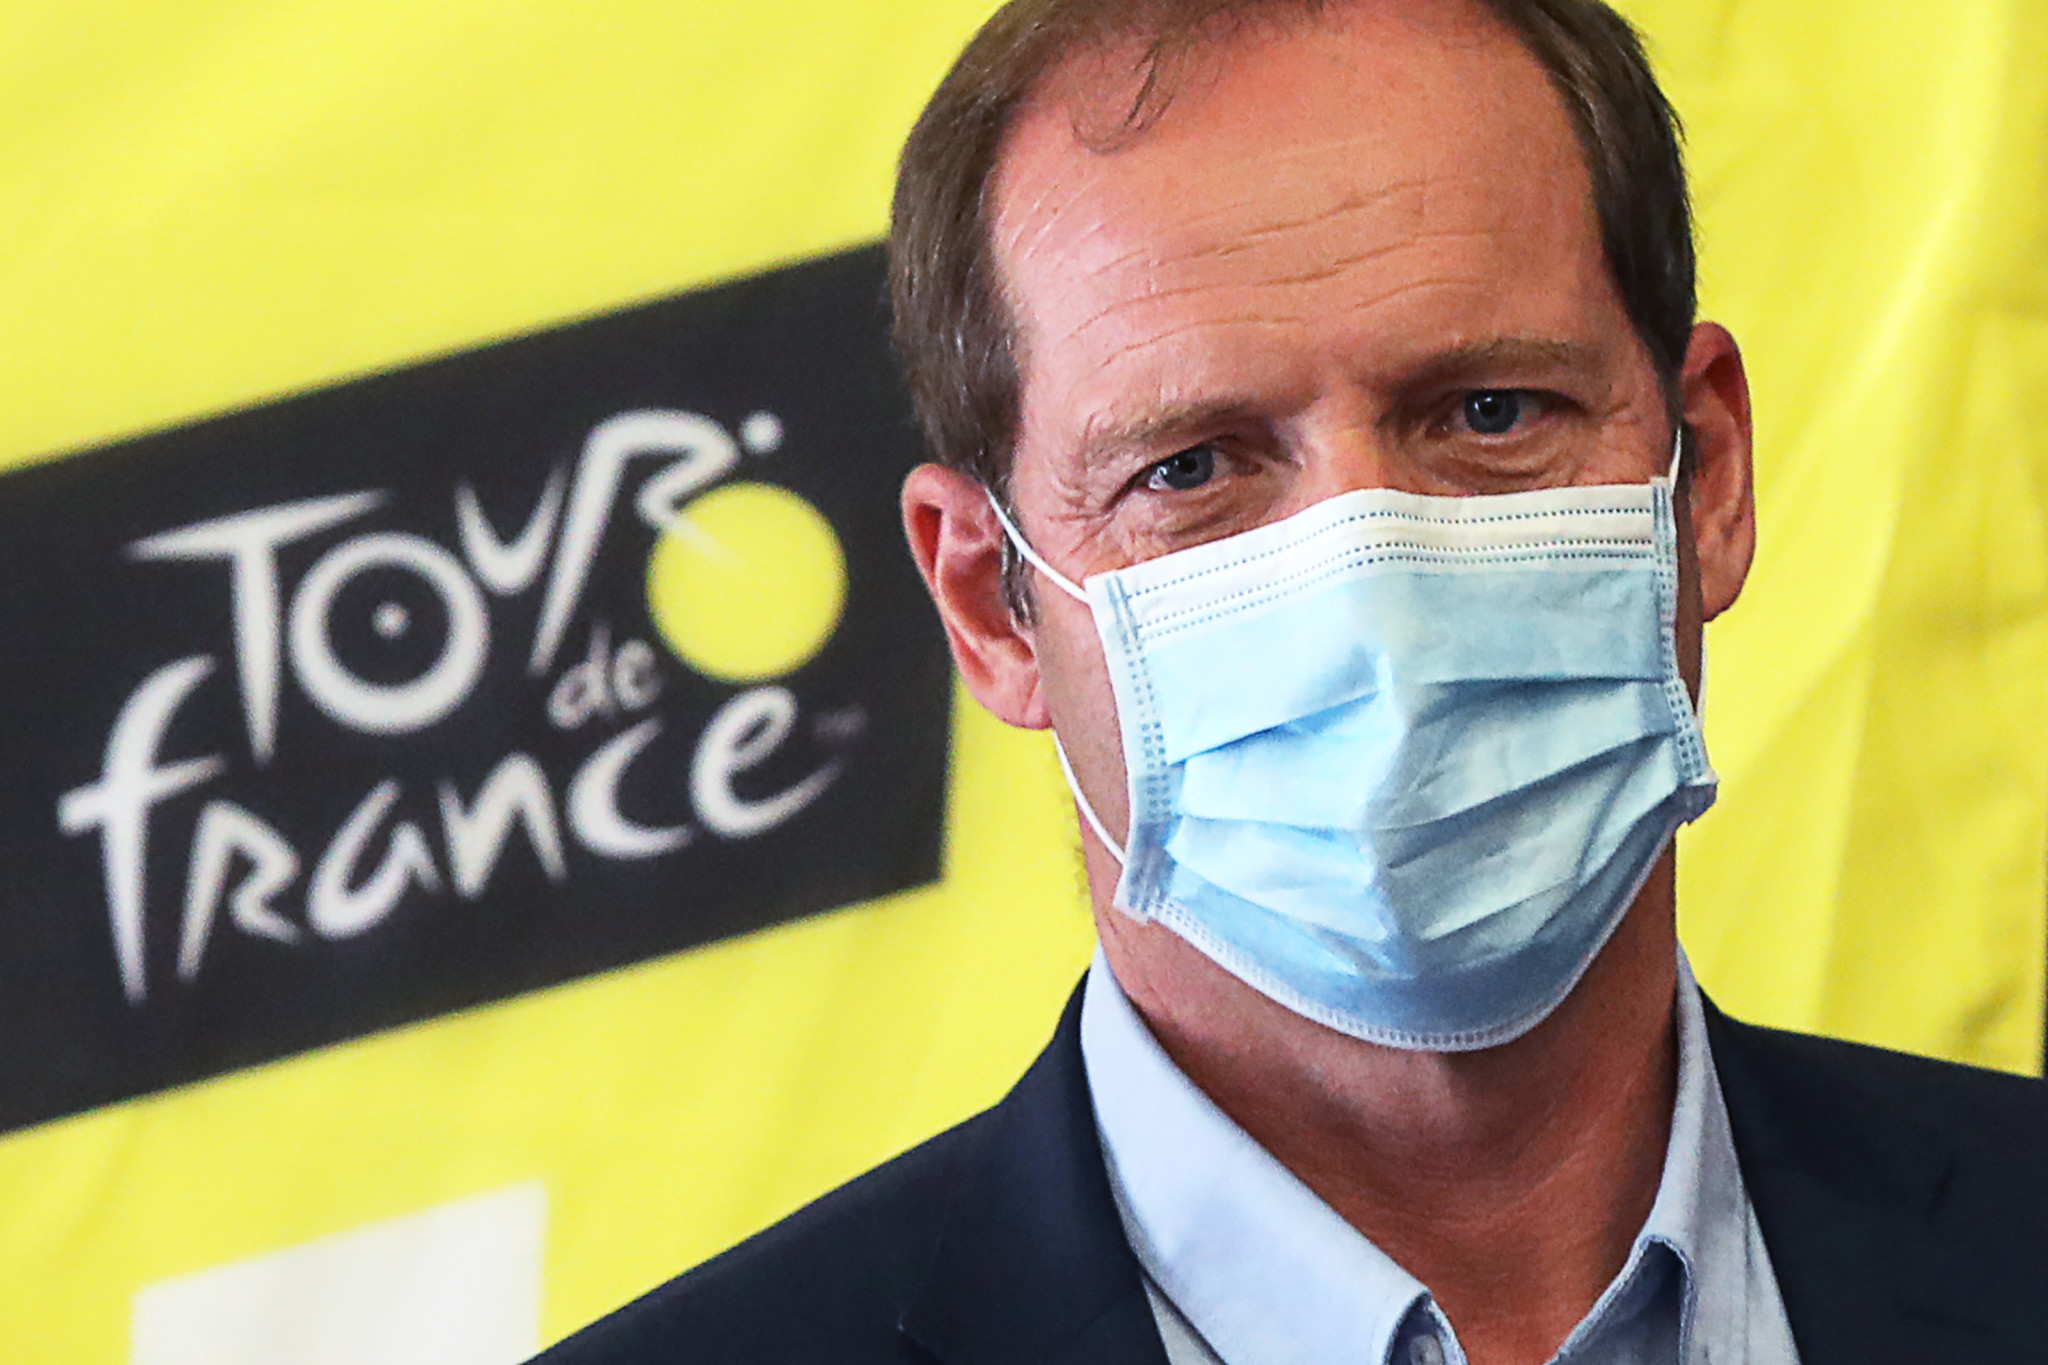 Tour de France race director tests positive for coronavirus as Bennett clinches maiden stage win